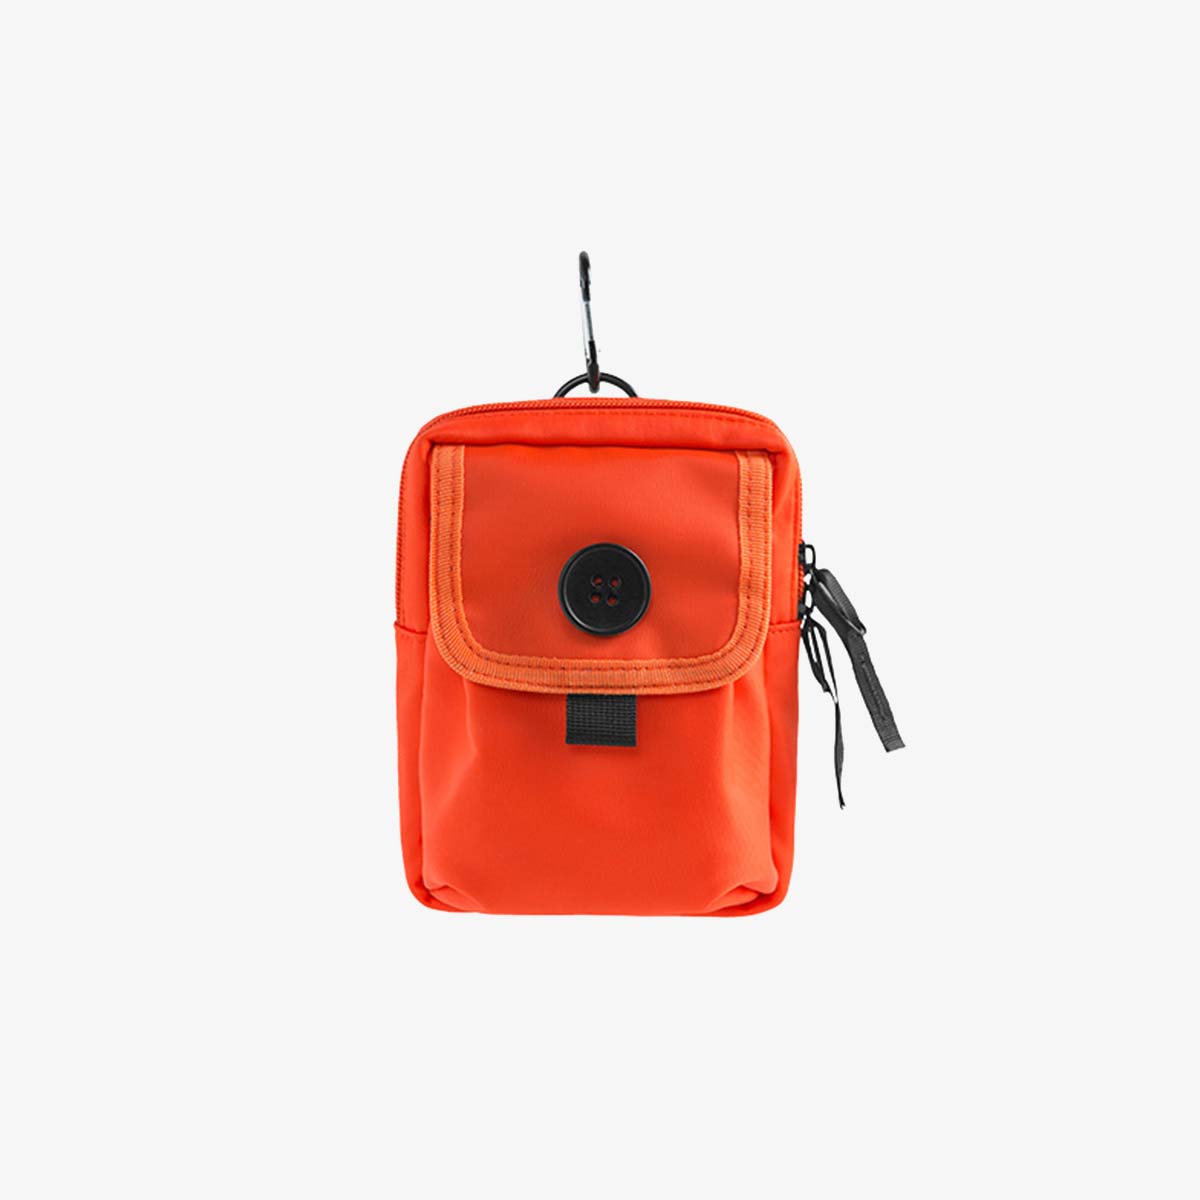 Personalized Button Hanging Bag Orange - SPICEUP